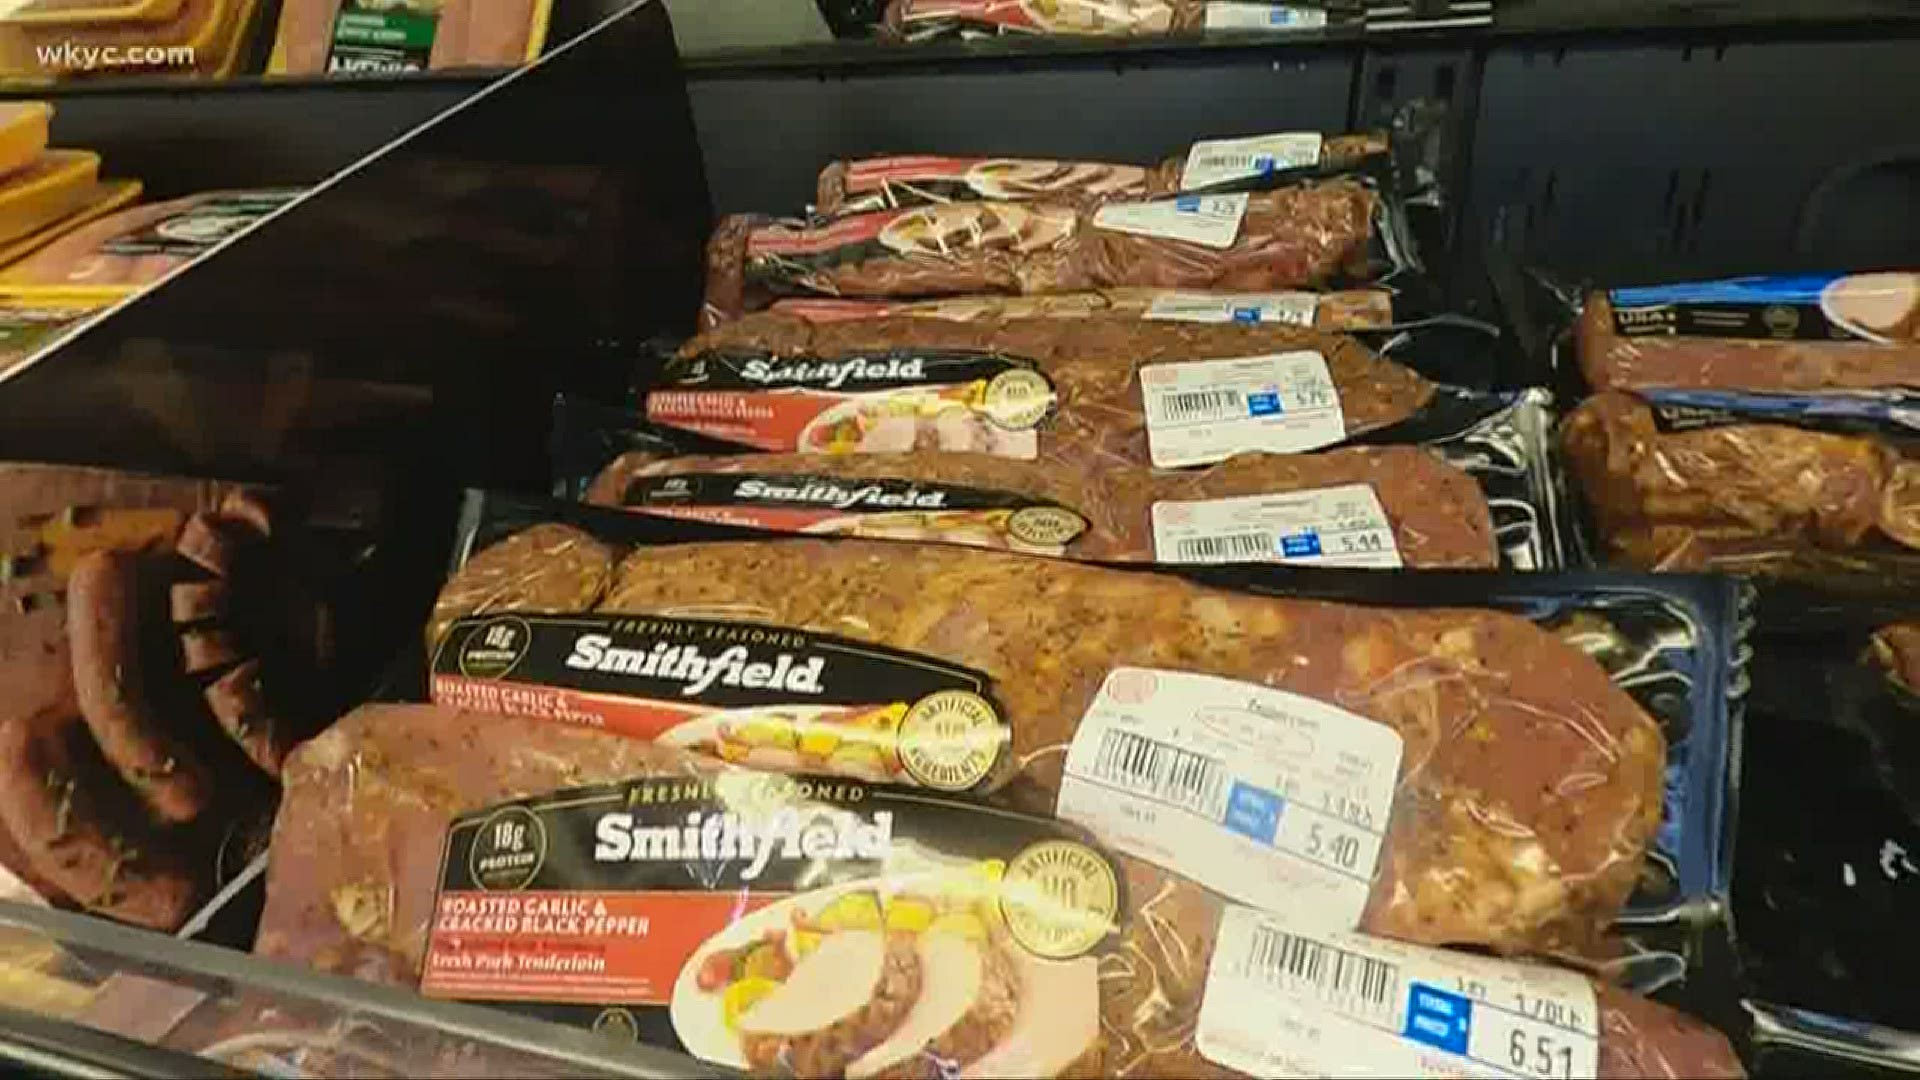 You can add another item to a possible shortage at your local supermarket: Meat. This time, it's not panic buying, but a shutdown at a major plant.